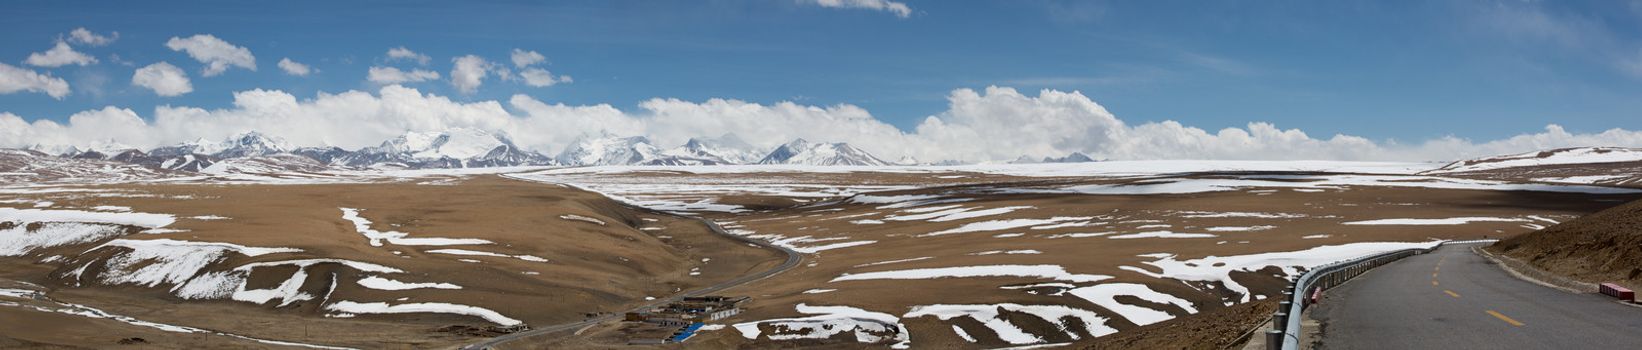 Panoramic view of the road with Tibetan landscape of Mountains in the background. There is s mall village in the foreground. The great Himalayas mountain range is the background. Friendship Highway, Tibet. China 2013